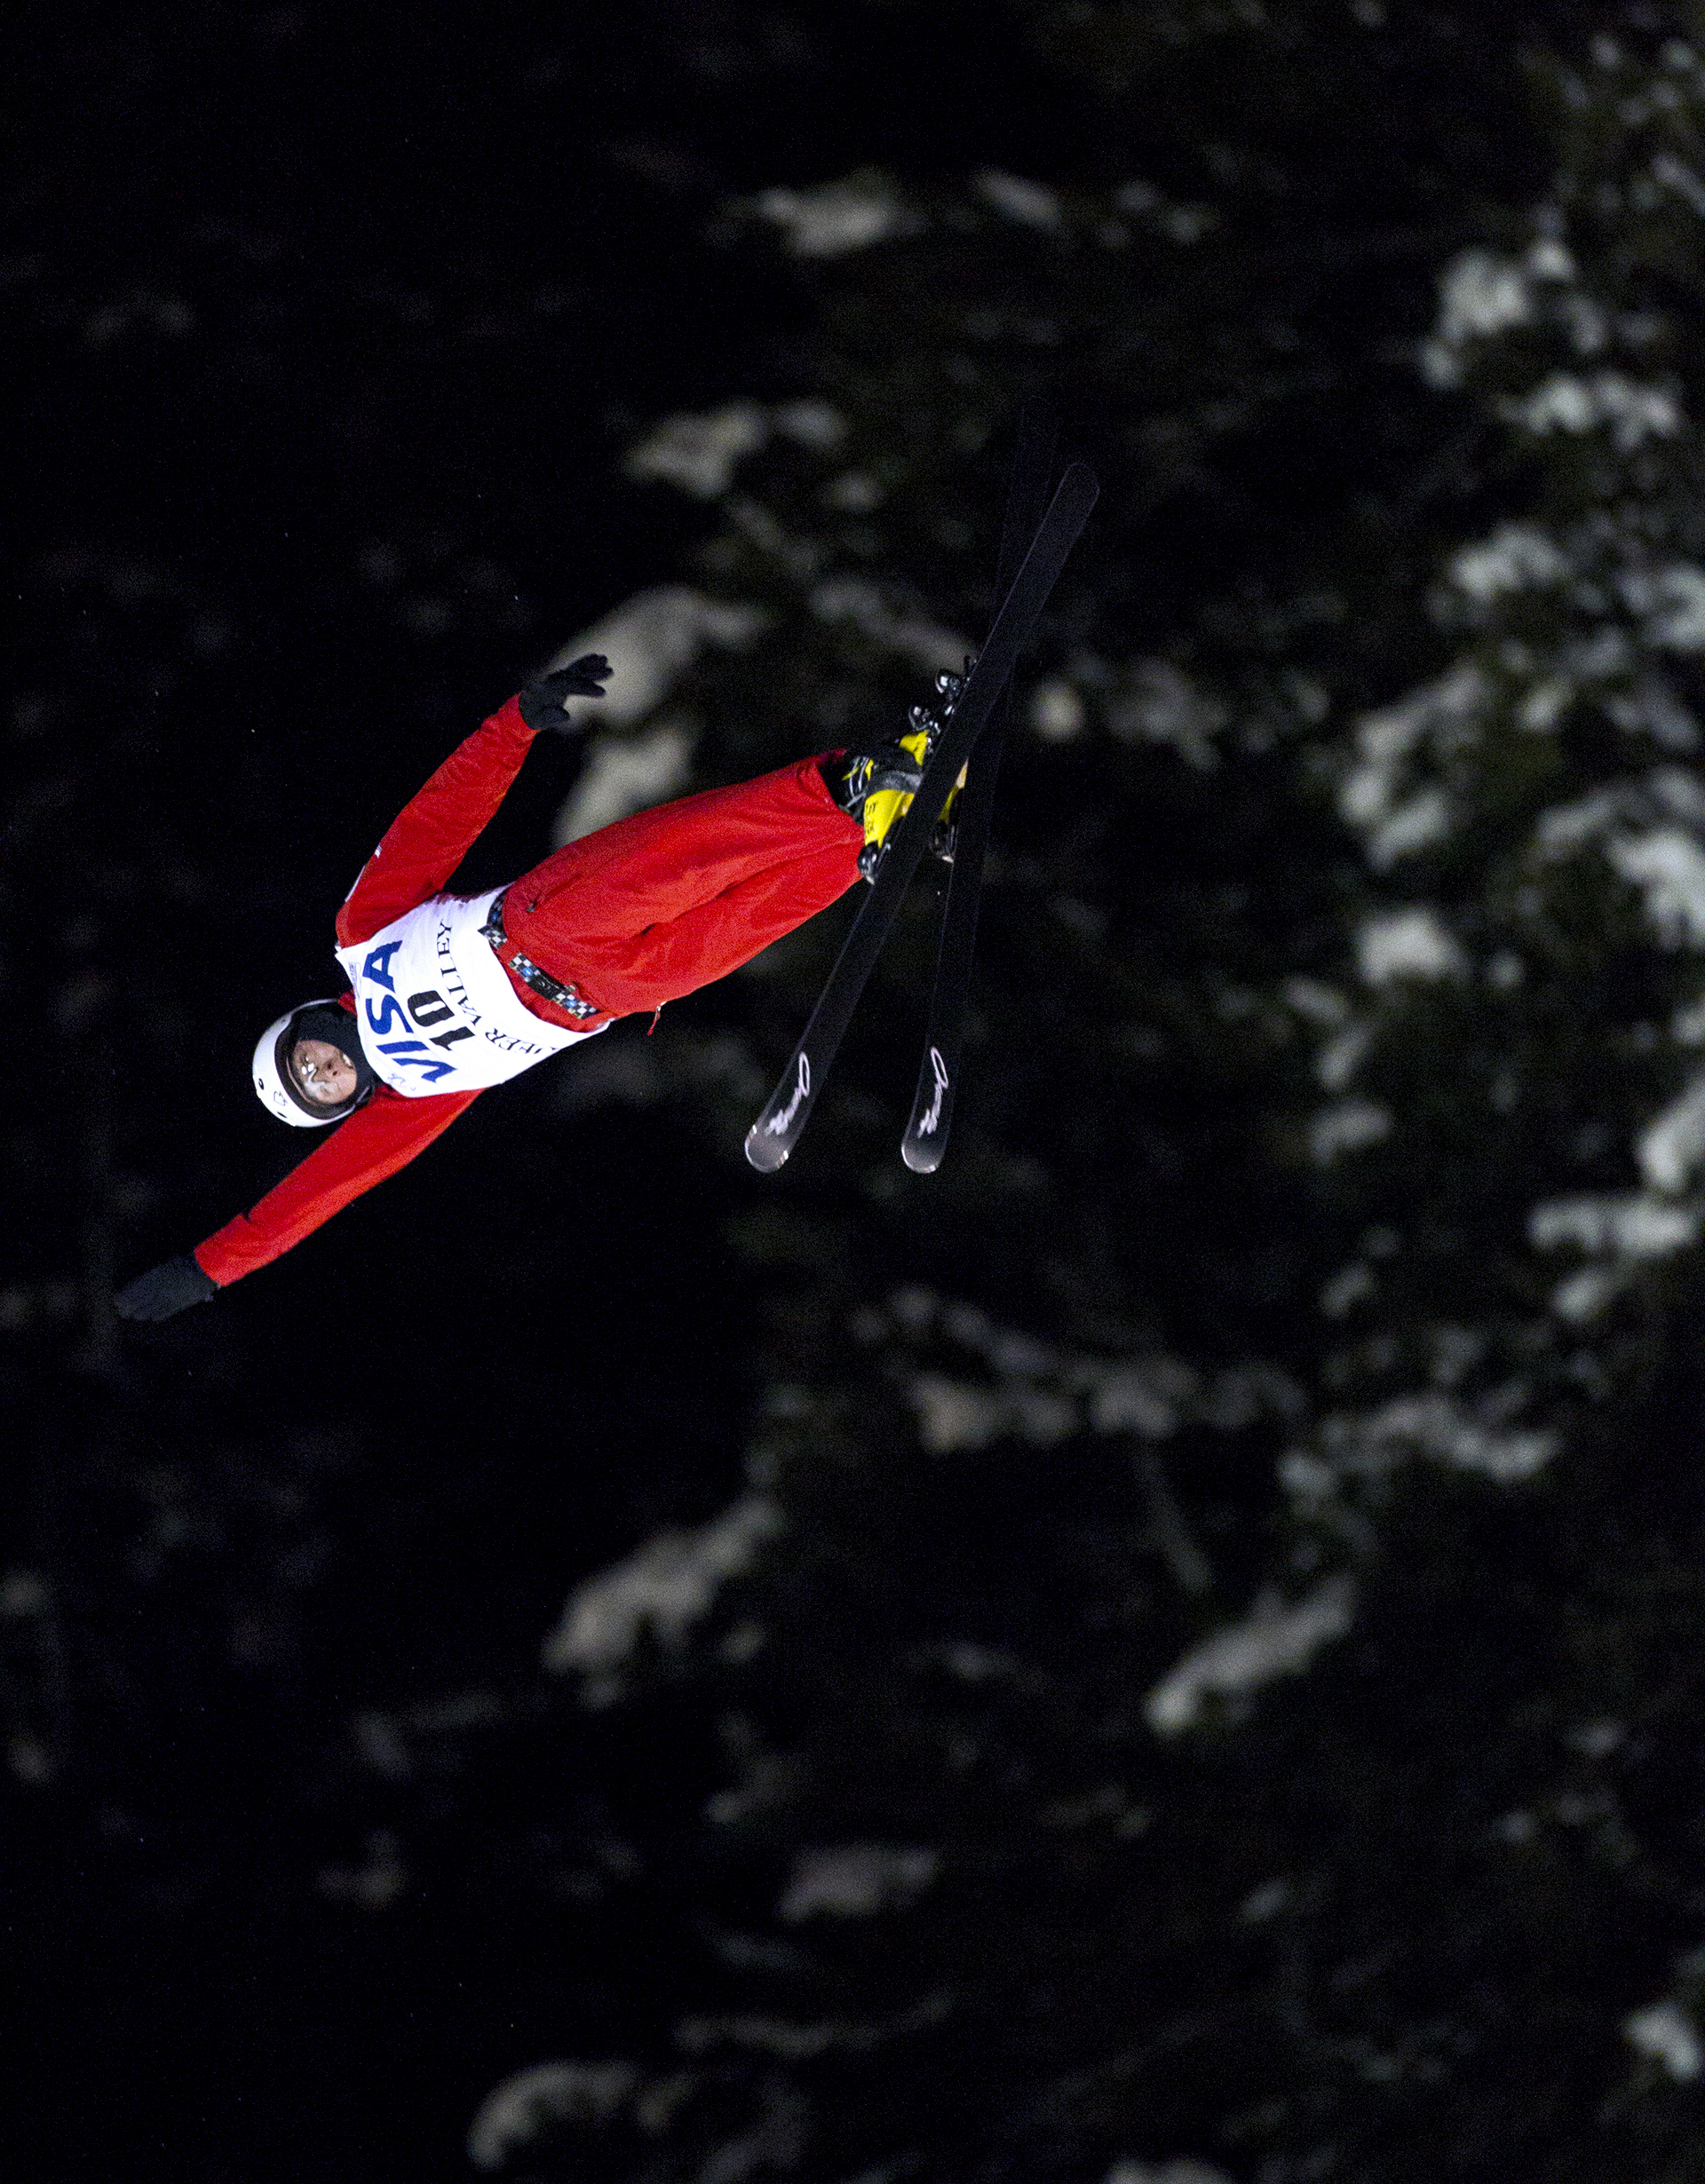  Petr Medulich of Russia extends his arm during his second and final jump in the men's finals of the Visa Freestyle International Aerials World Cup at Deer Valley Resort Friday, Feb. 5, 2016 in Park City, Utah. The jump registered a score of 128.05 w